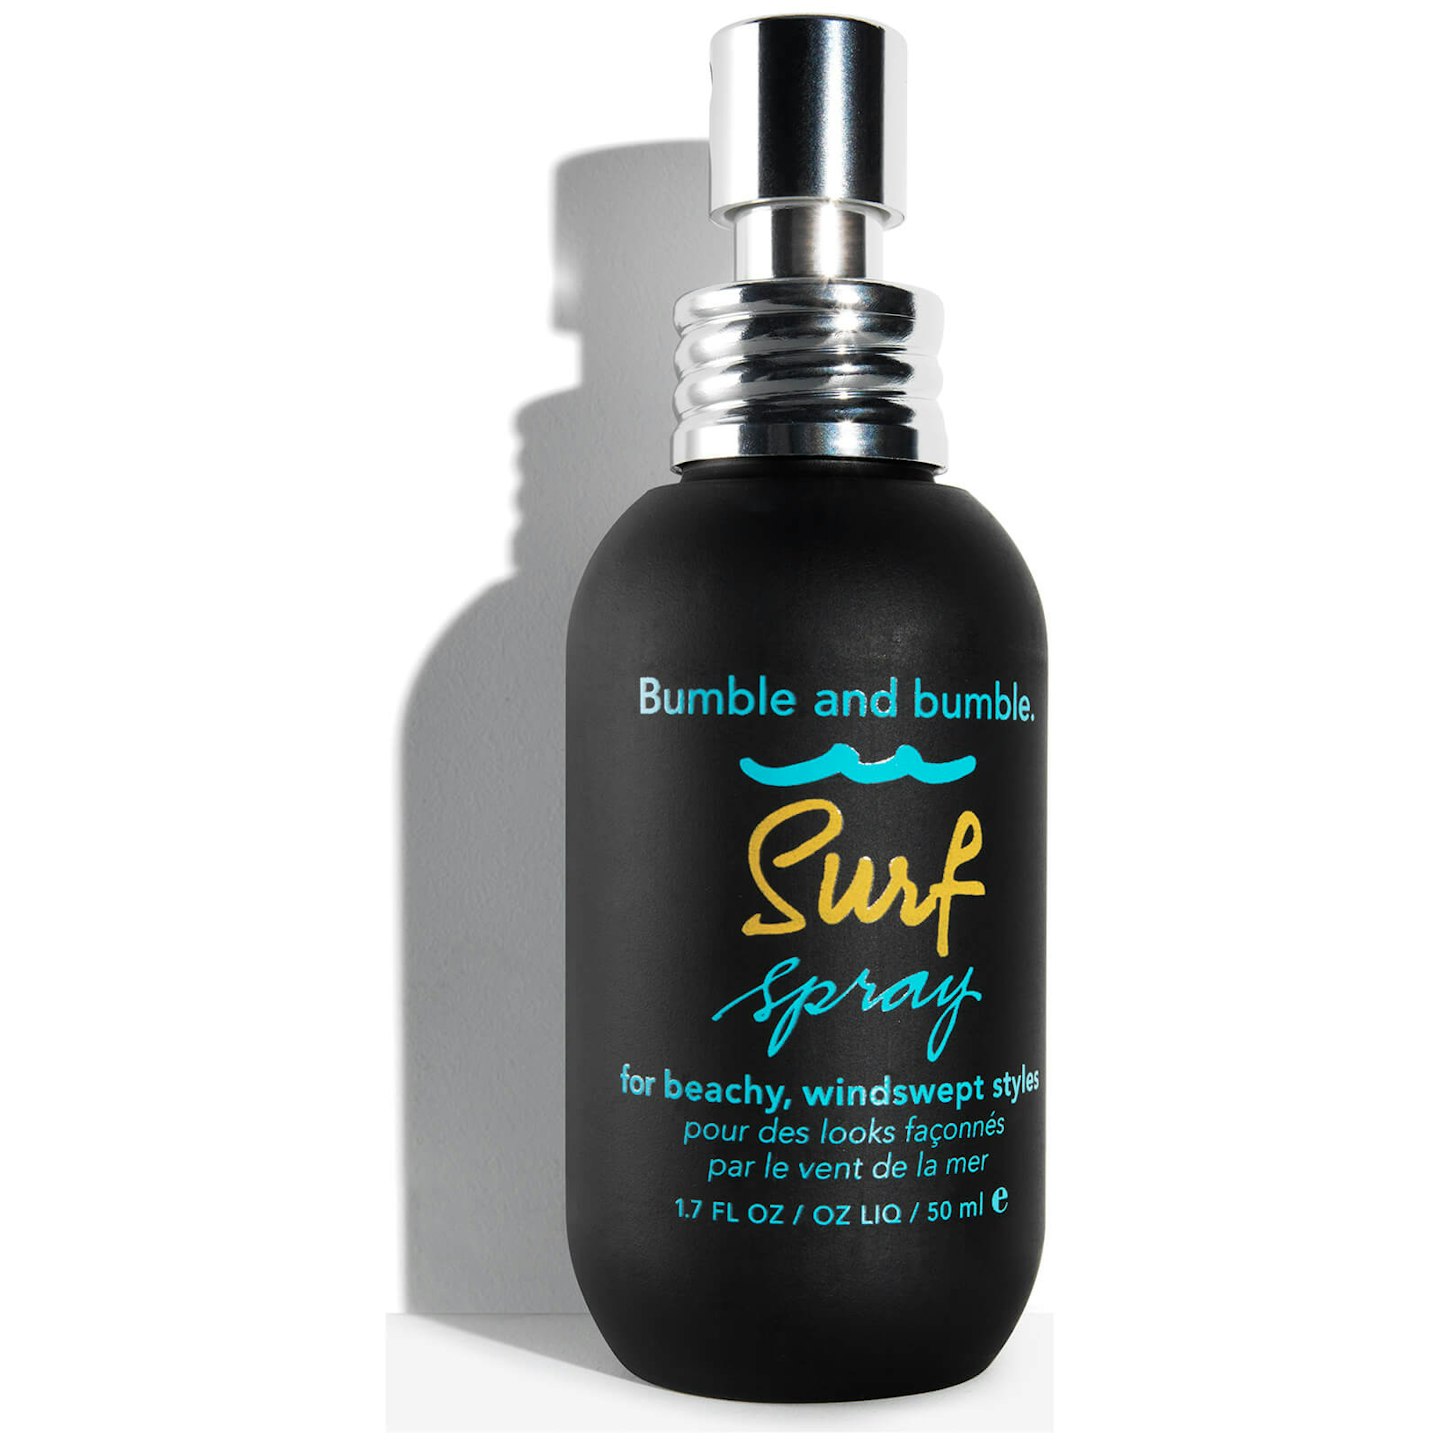 Bumble and bumble Surf Spray, £10